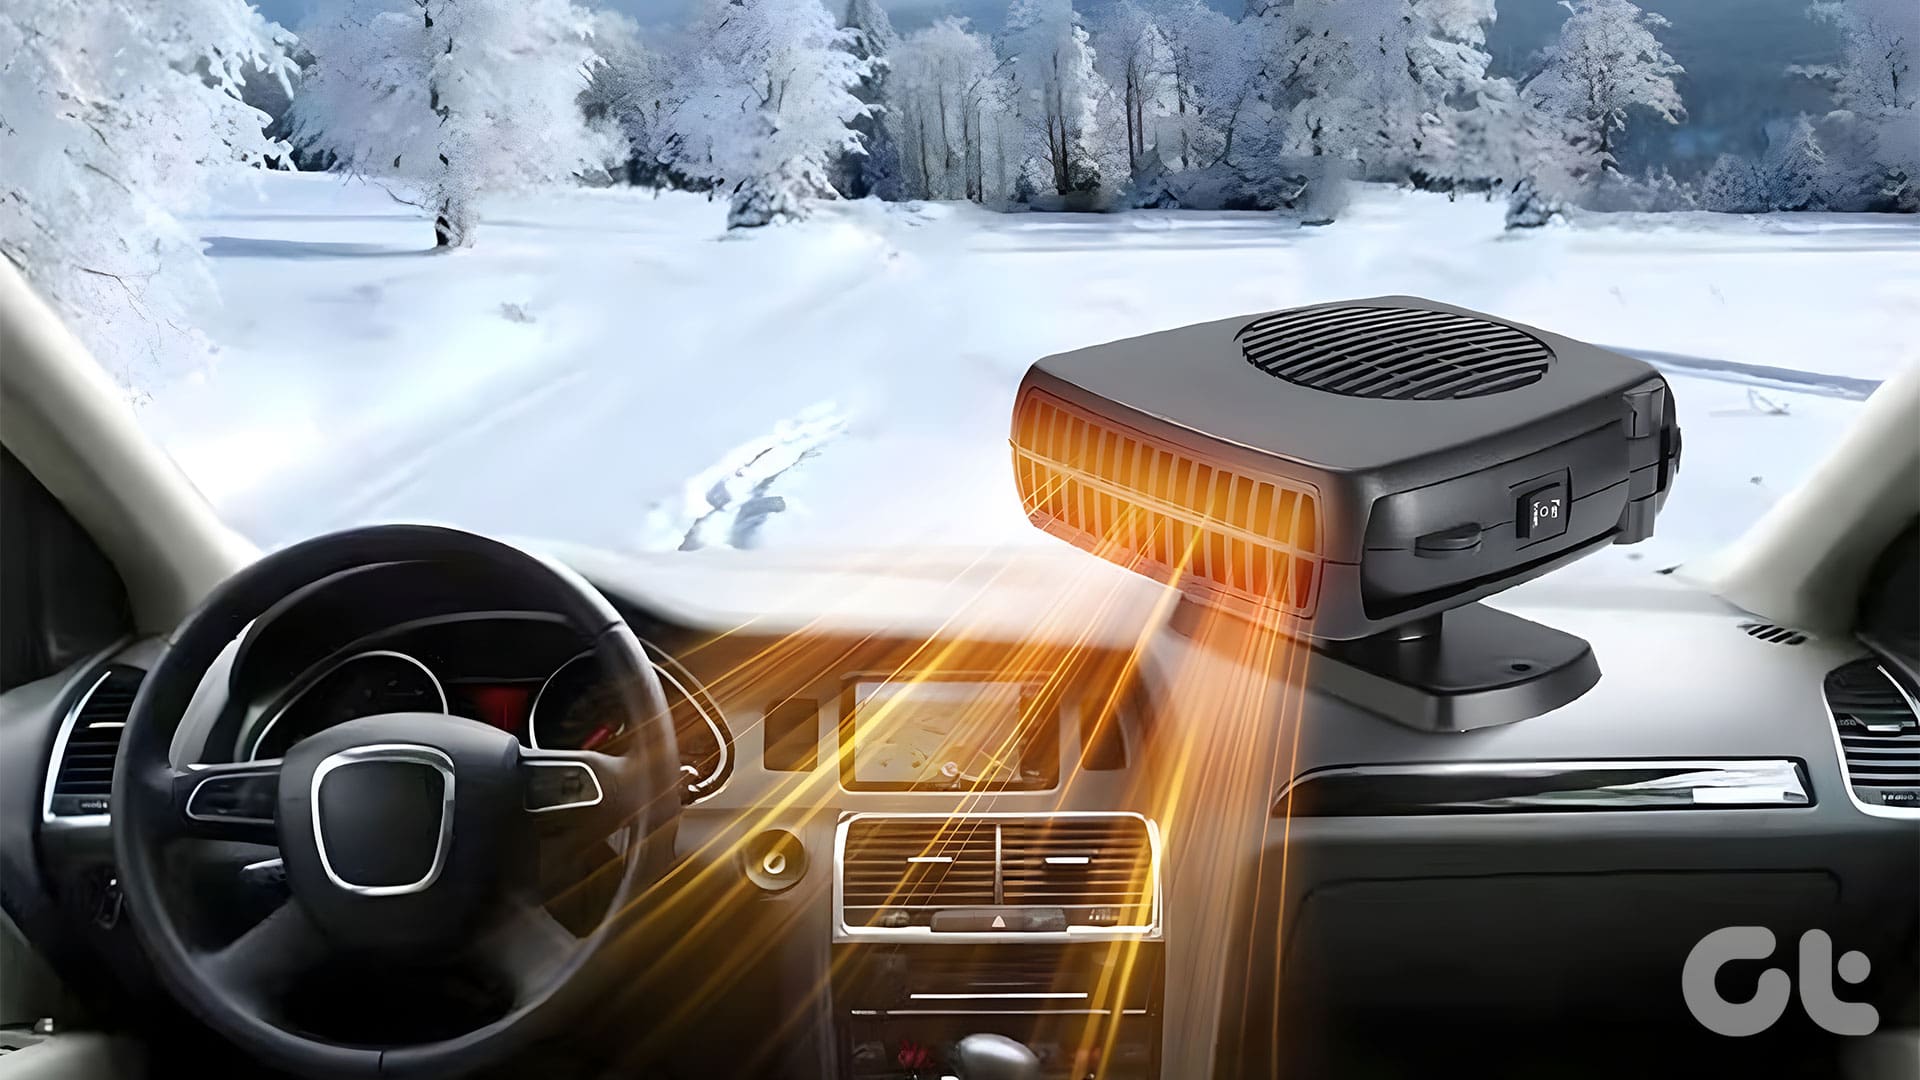 Top 6 Best Portable Electric Car Heaters of 2022